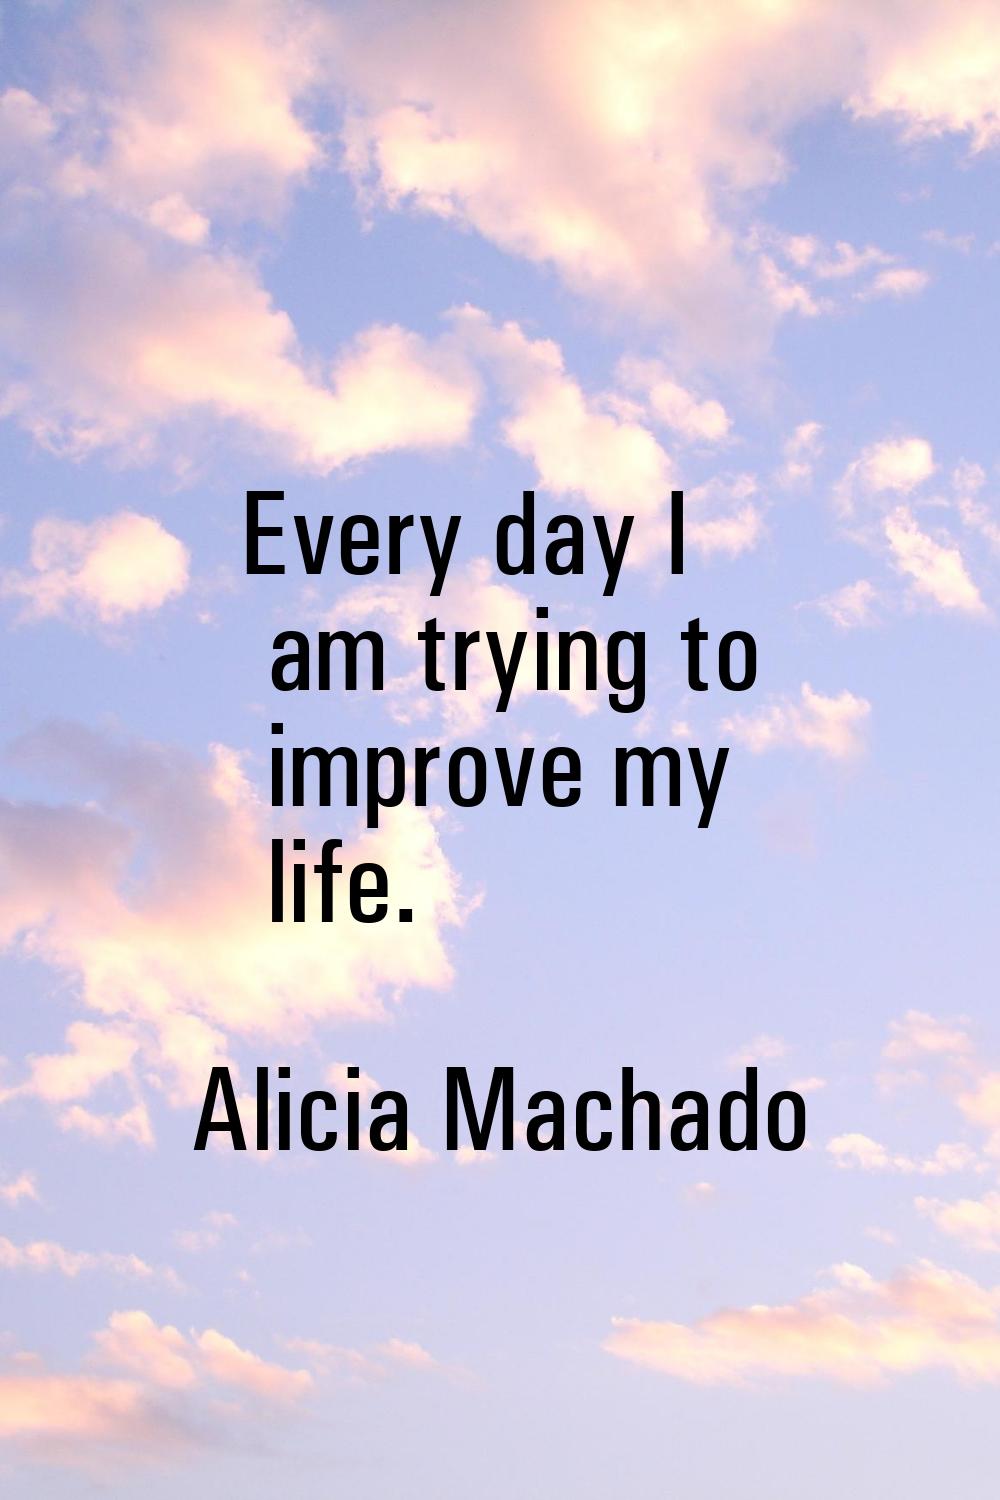 Every day I am trying to improve my life.